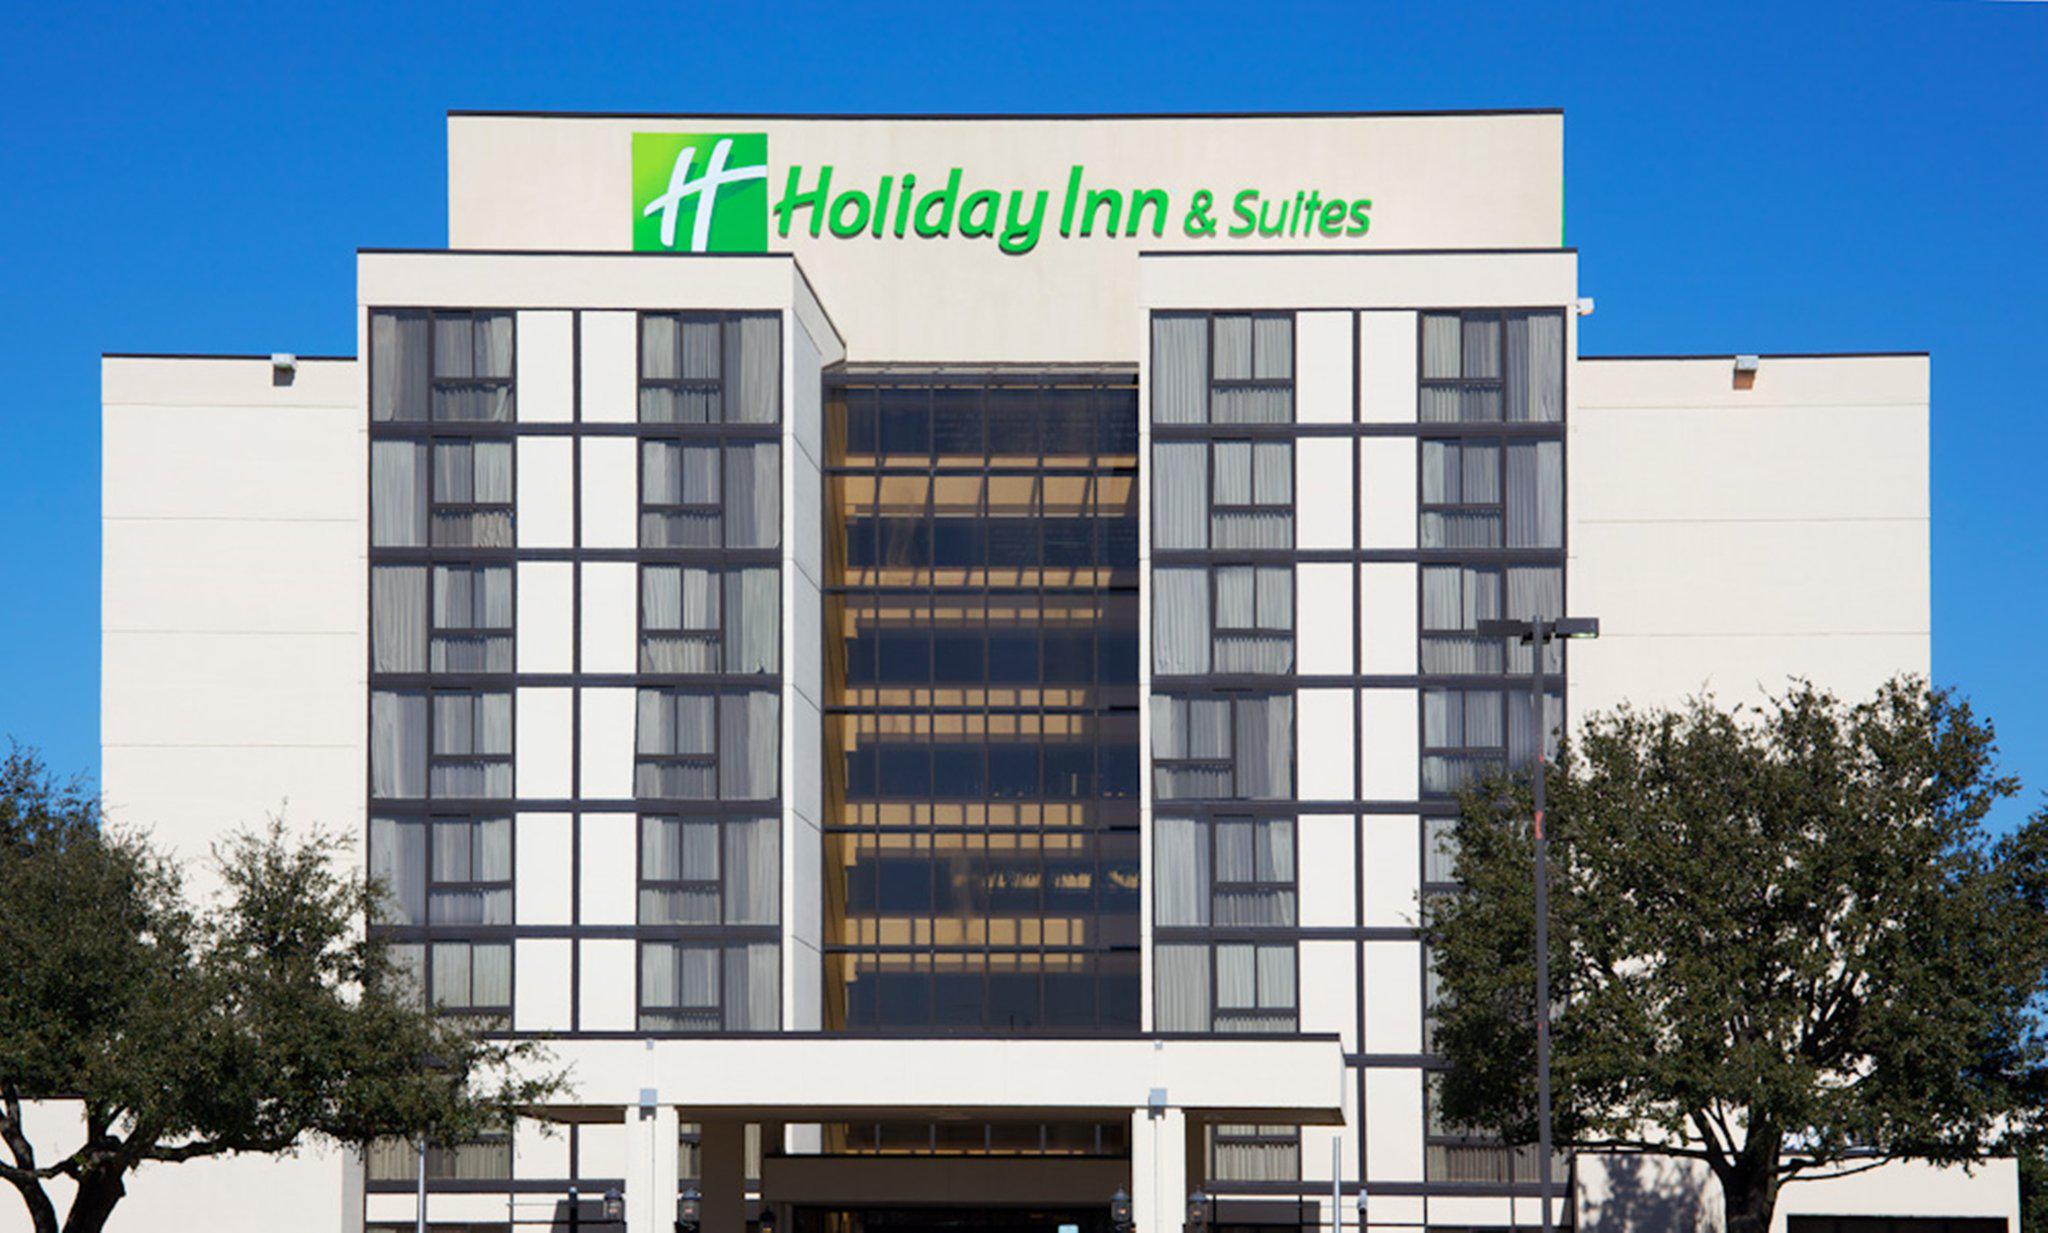 Holiday Inn & Suites Beaumont-Plaza (I-10 & Walden) Photo